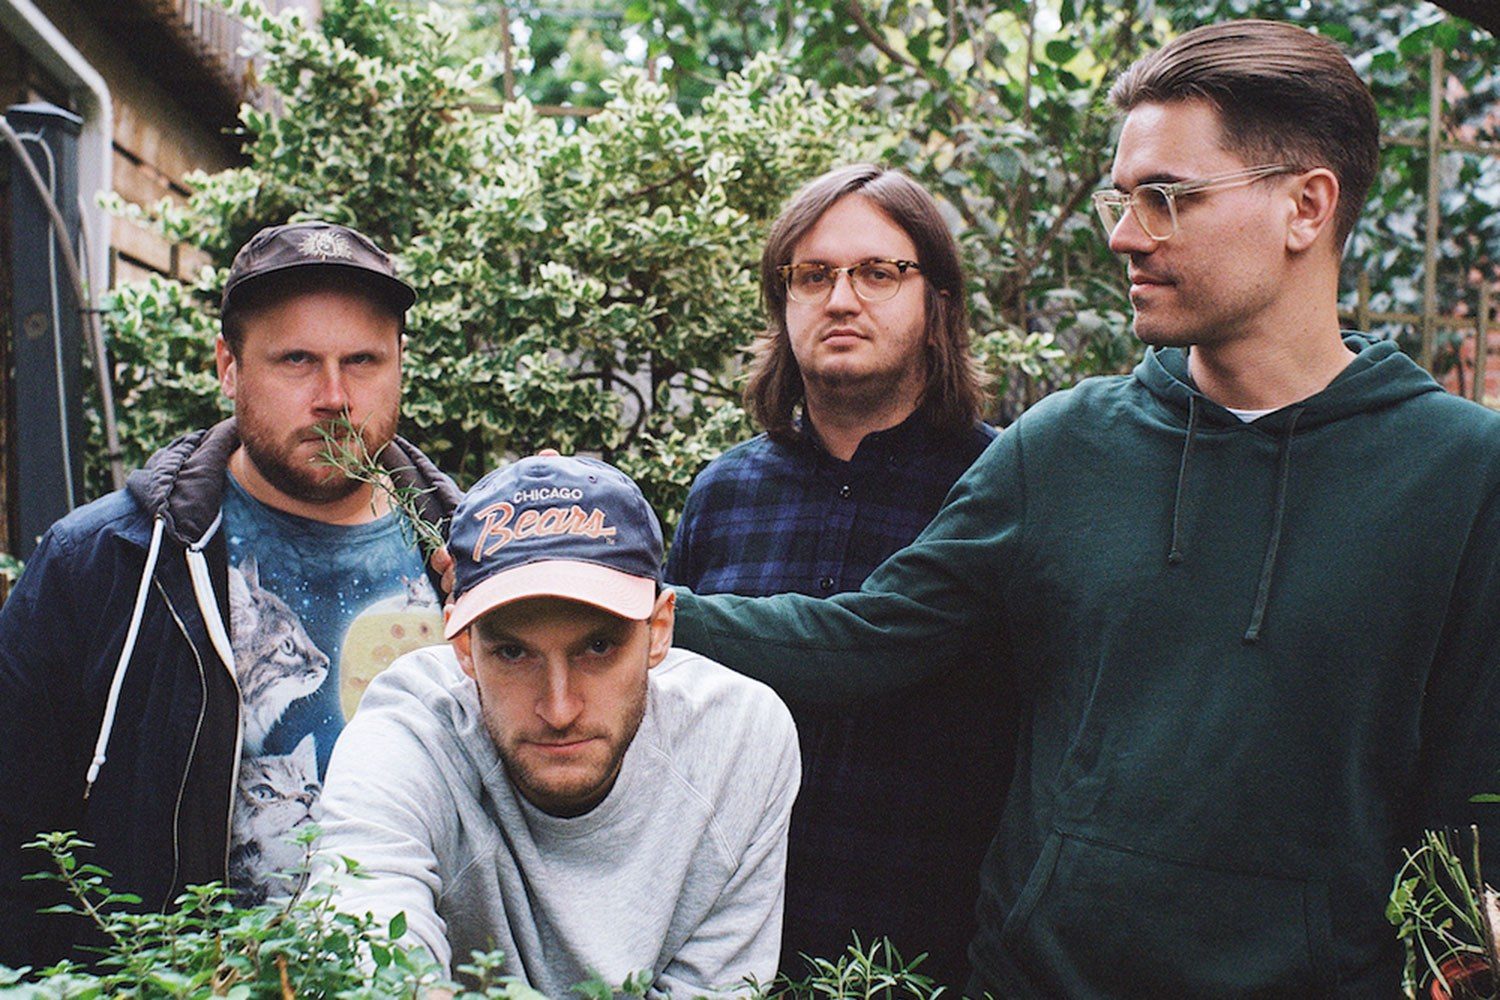 PUP share two new songs: “Sibling Rivalry” and “Scorpion Hill”